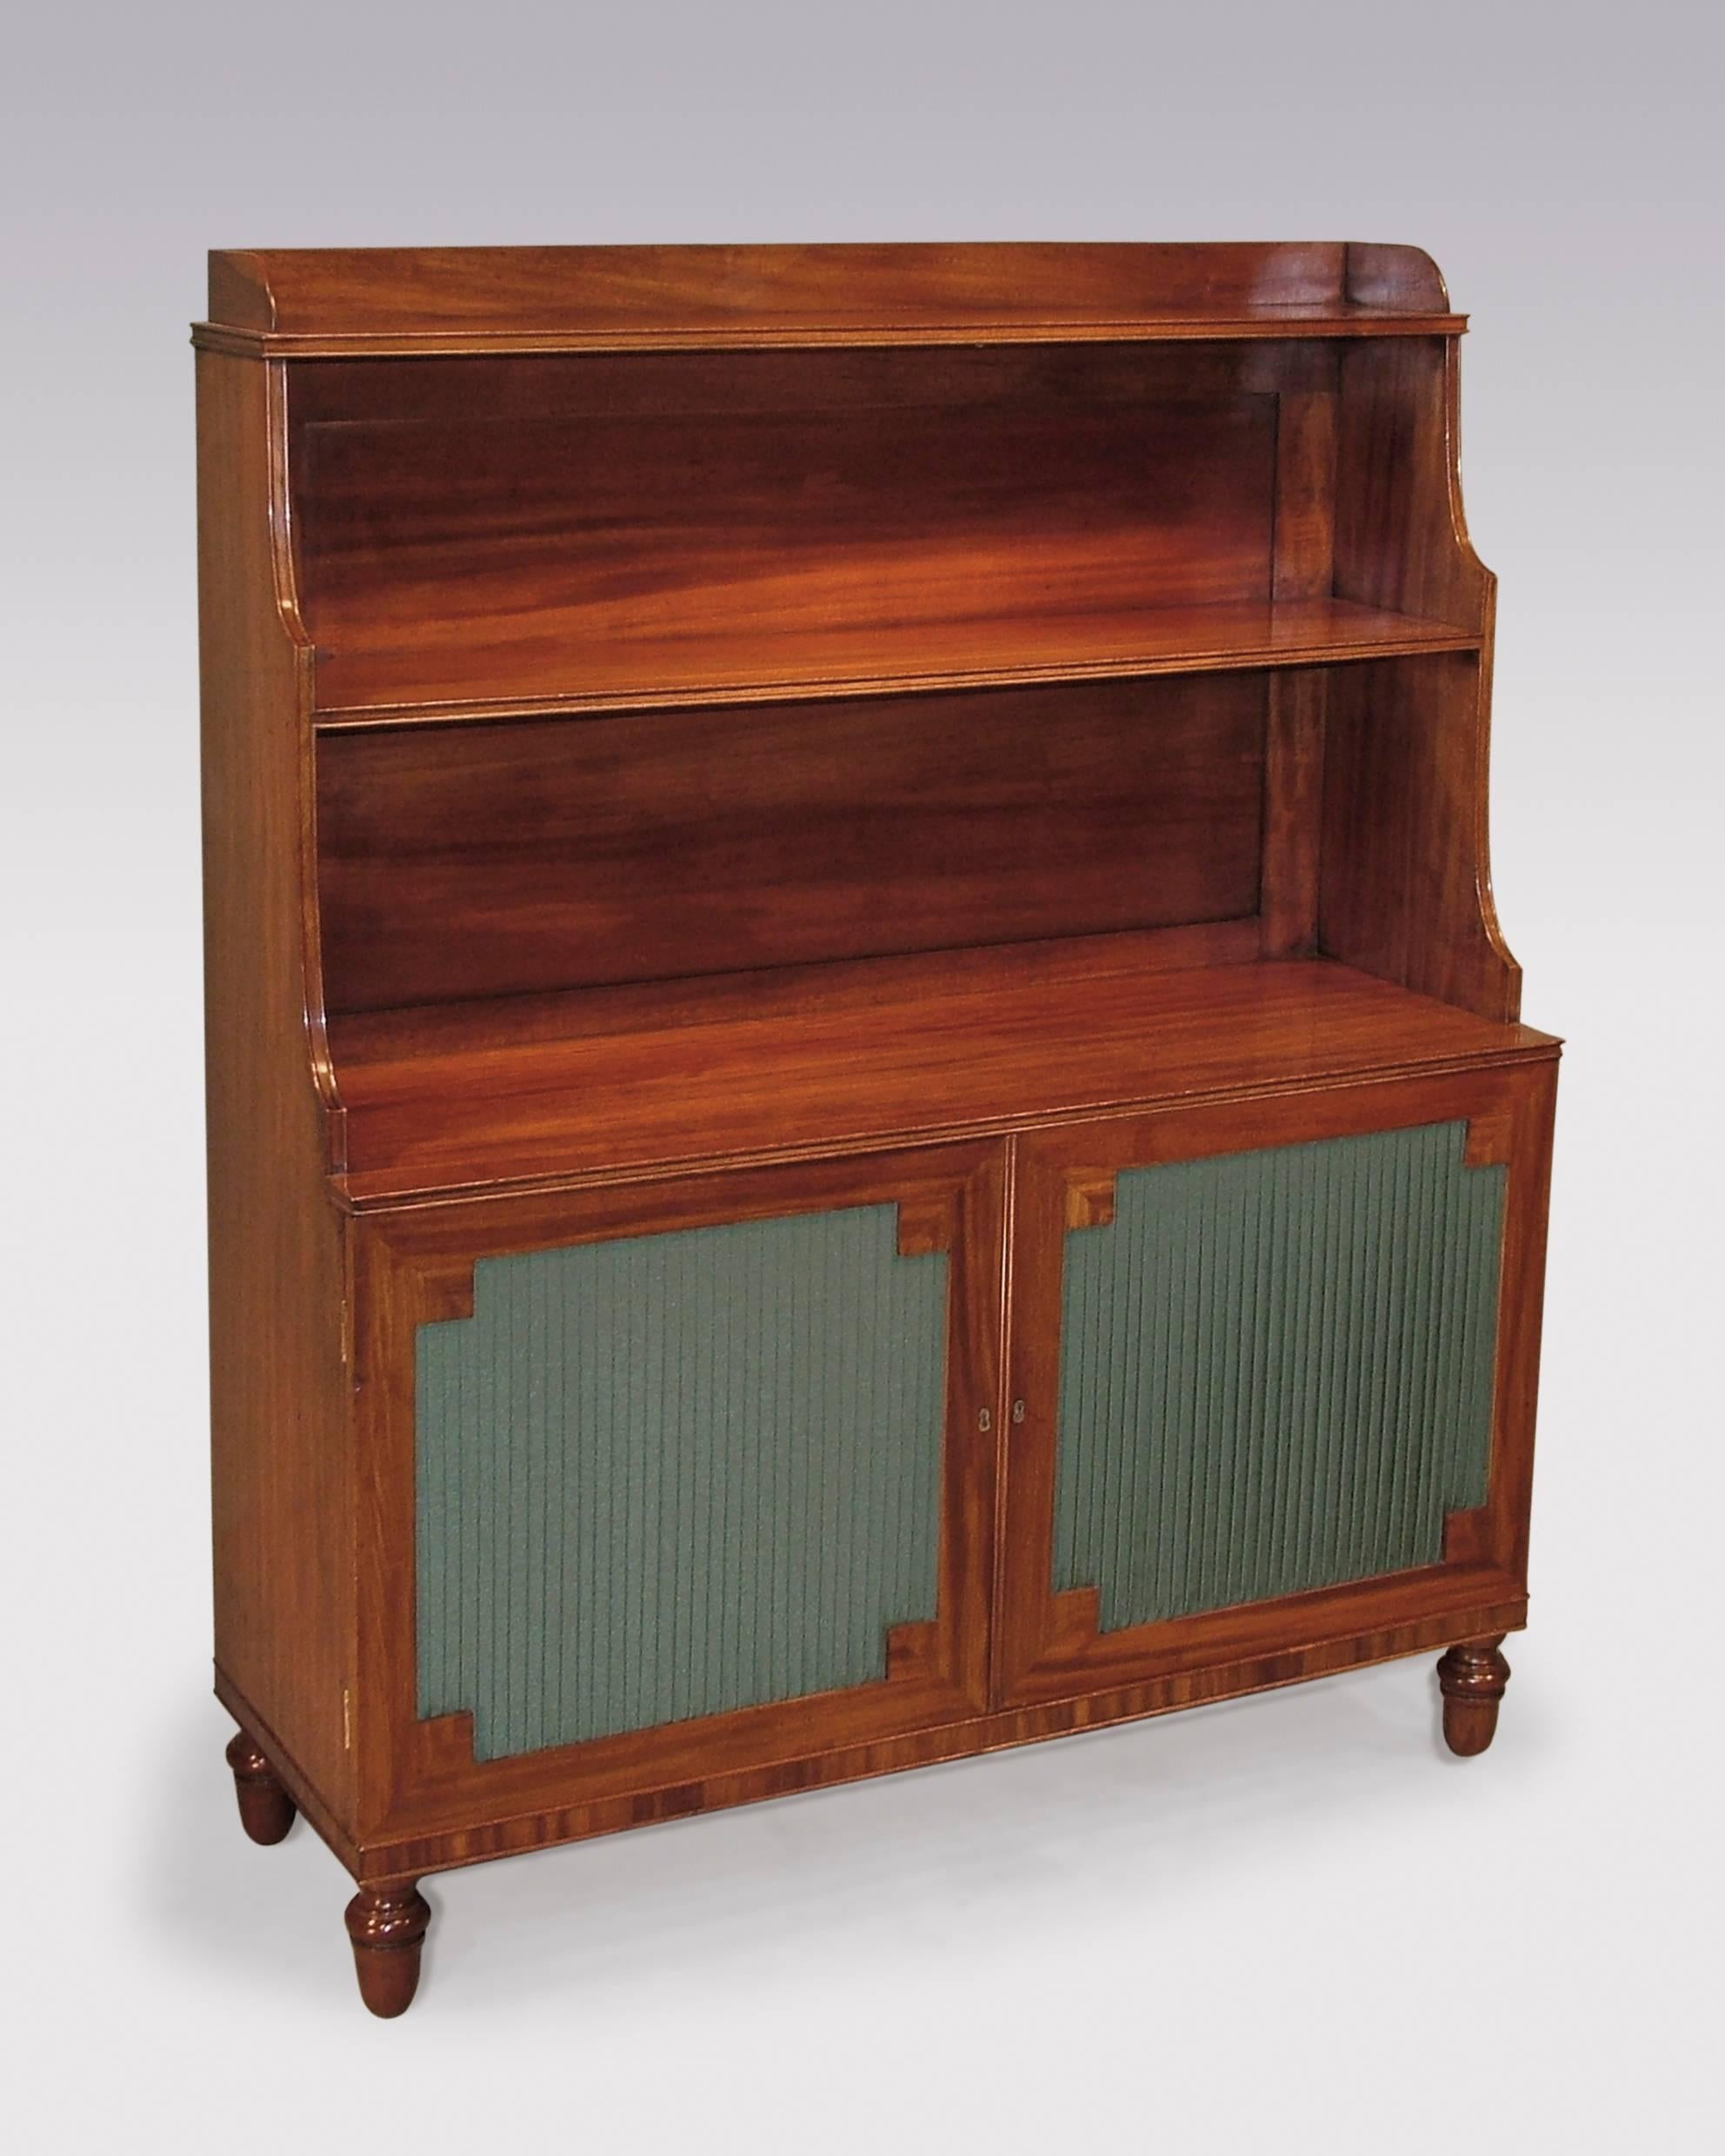 A pair of early 19th century Regency period well figured mahogany waterfall bookshelves, having galleried tops above beaded edged graduated shelves, above pleated panelled doors with mitred corners, supported on turned acorn feet.